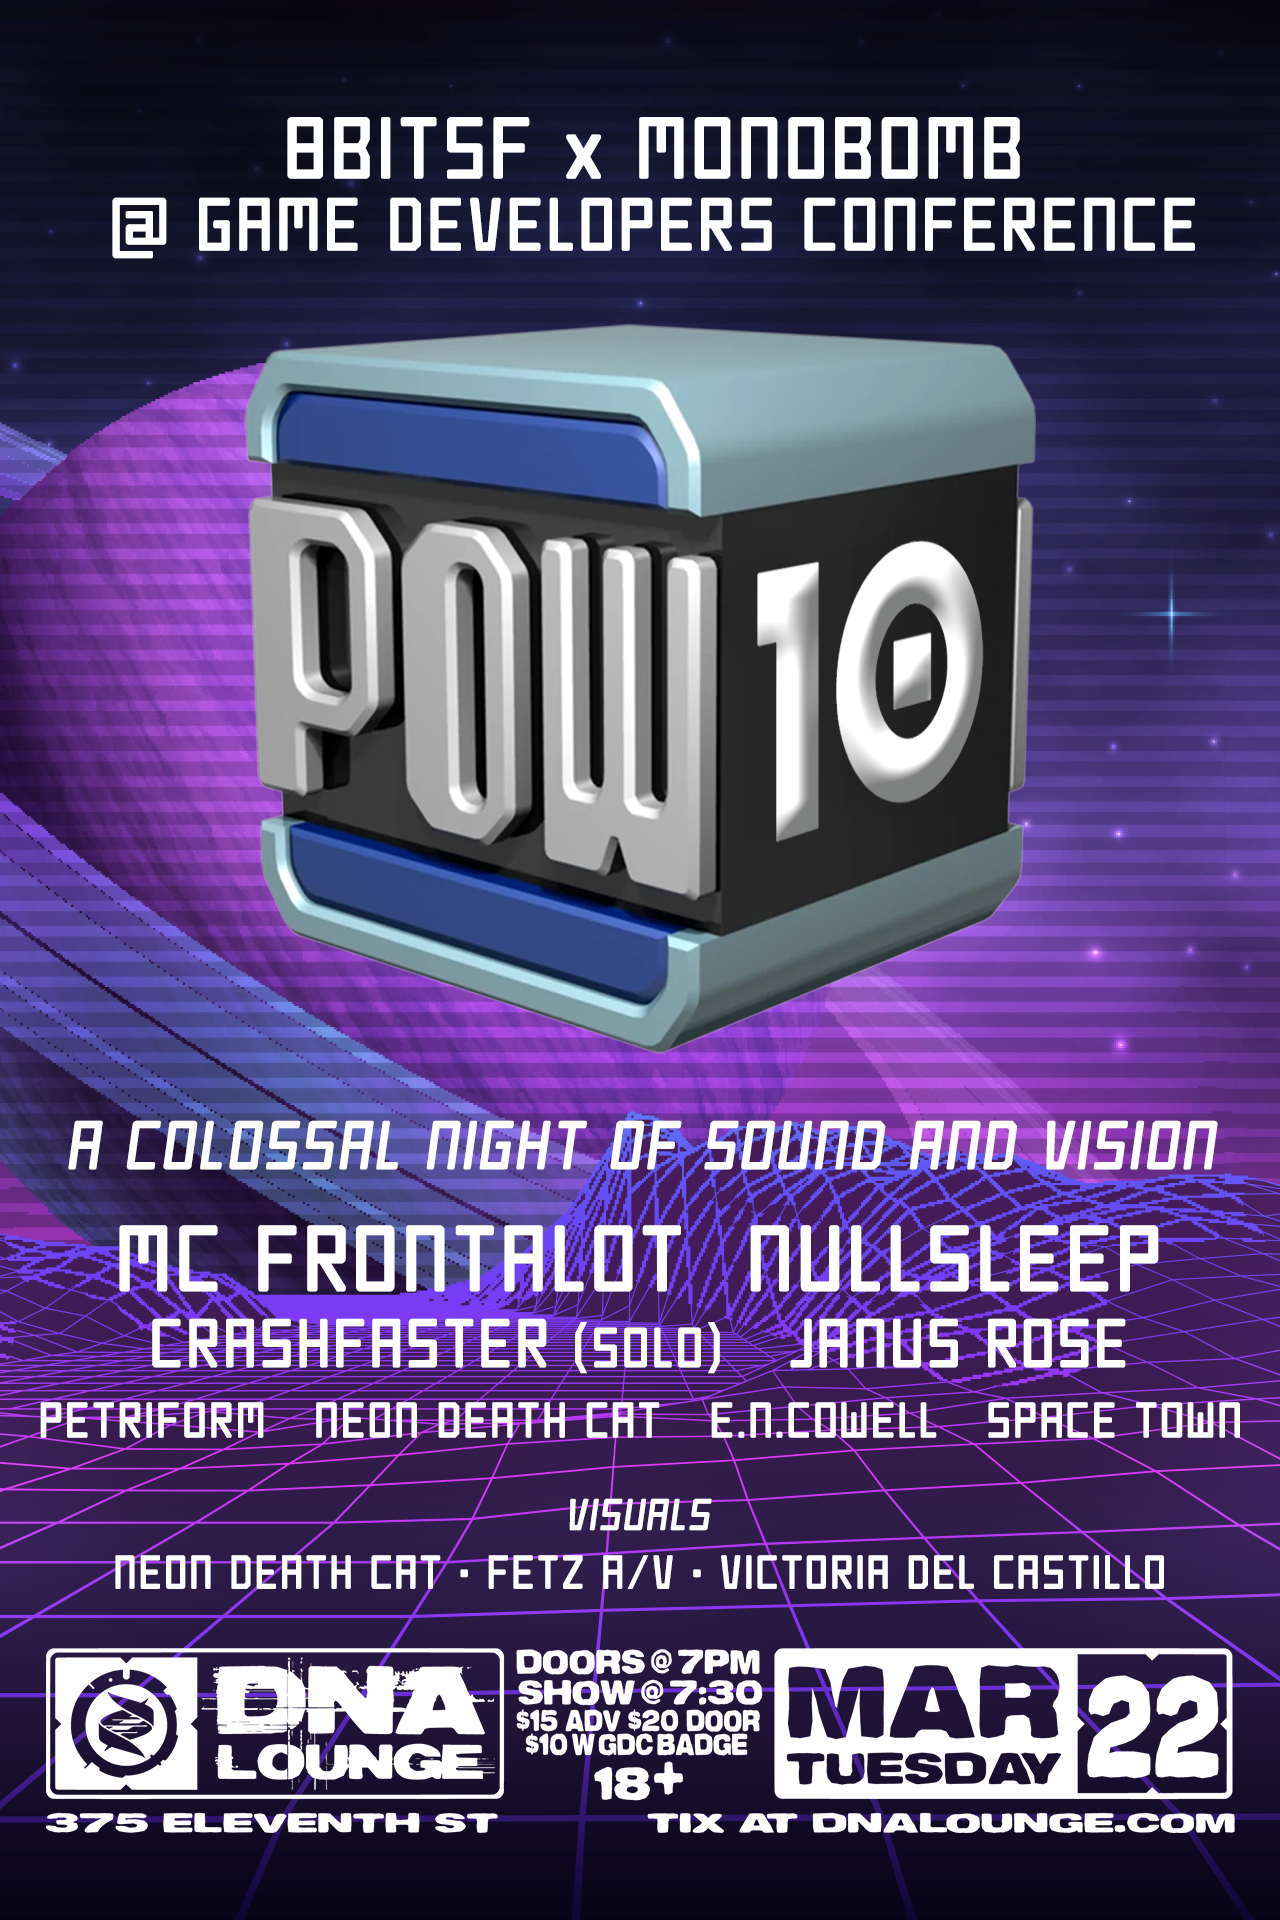 8bitSF x Monobomb: POW x 10 at GDC - A Colossal Night of Sound and 